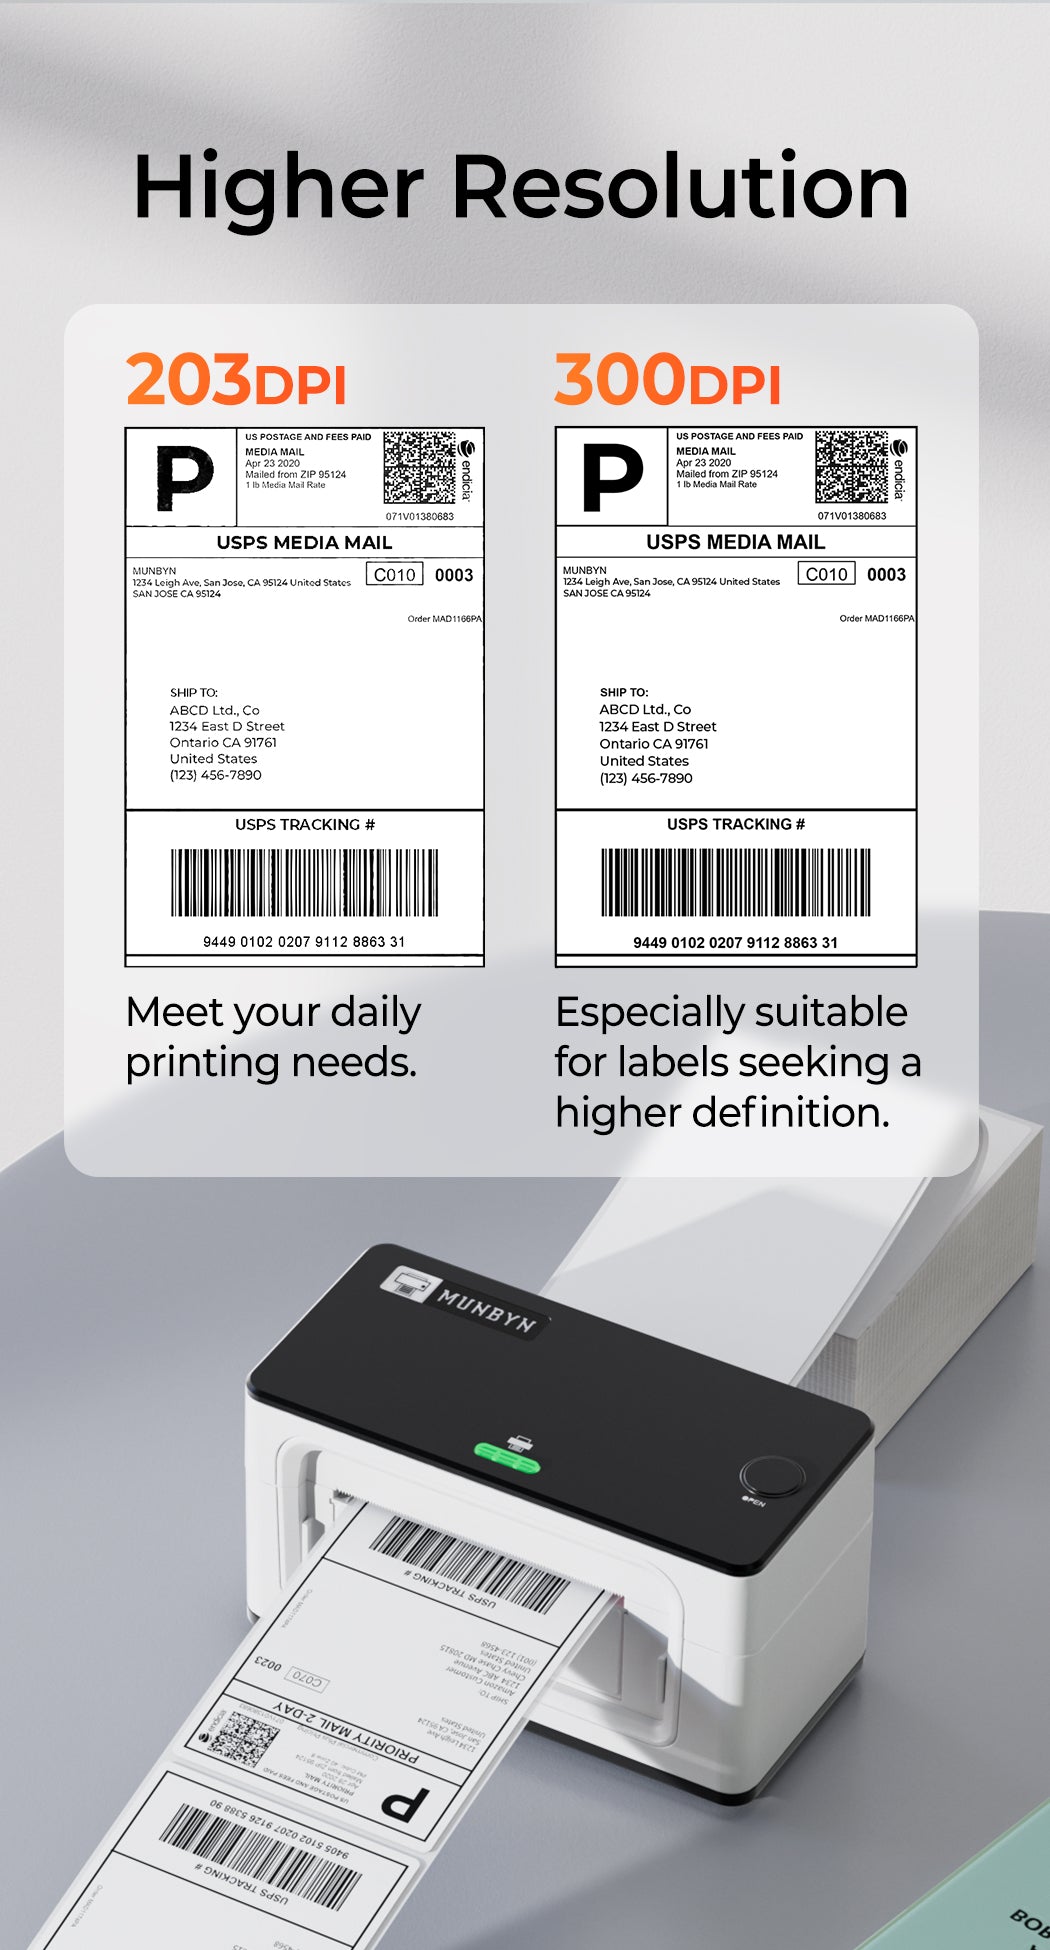 The Thermal Label Printer P941B offers a 300 DPI resolution